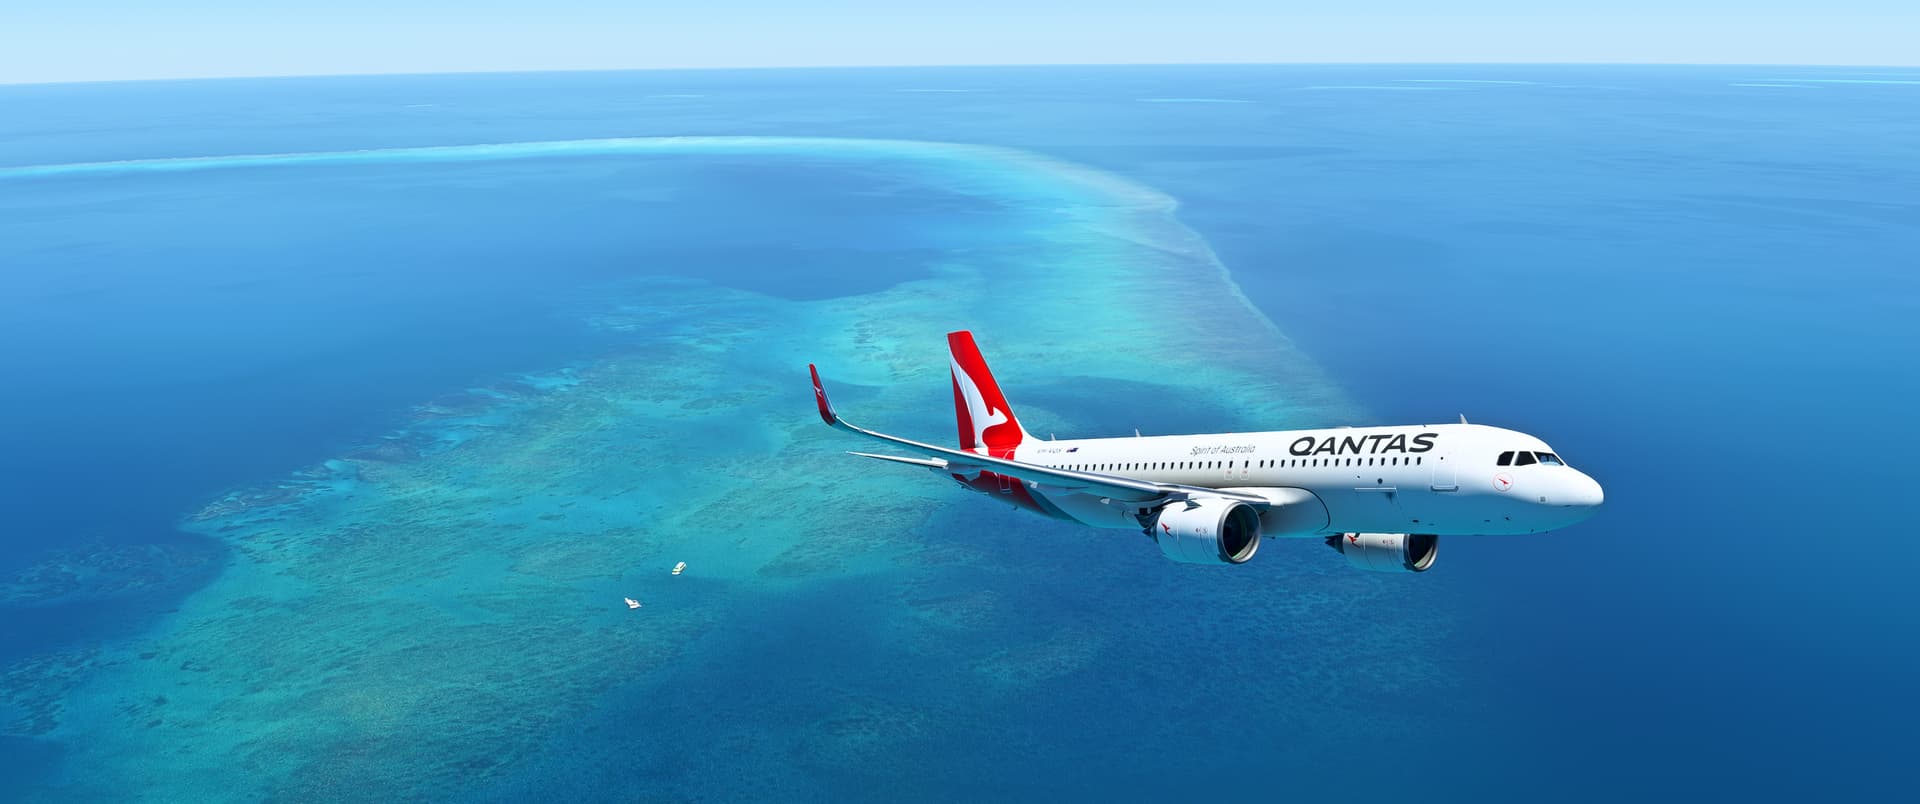 A jetliner with a Qantas livery flies over the Great Barrier Reef.